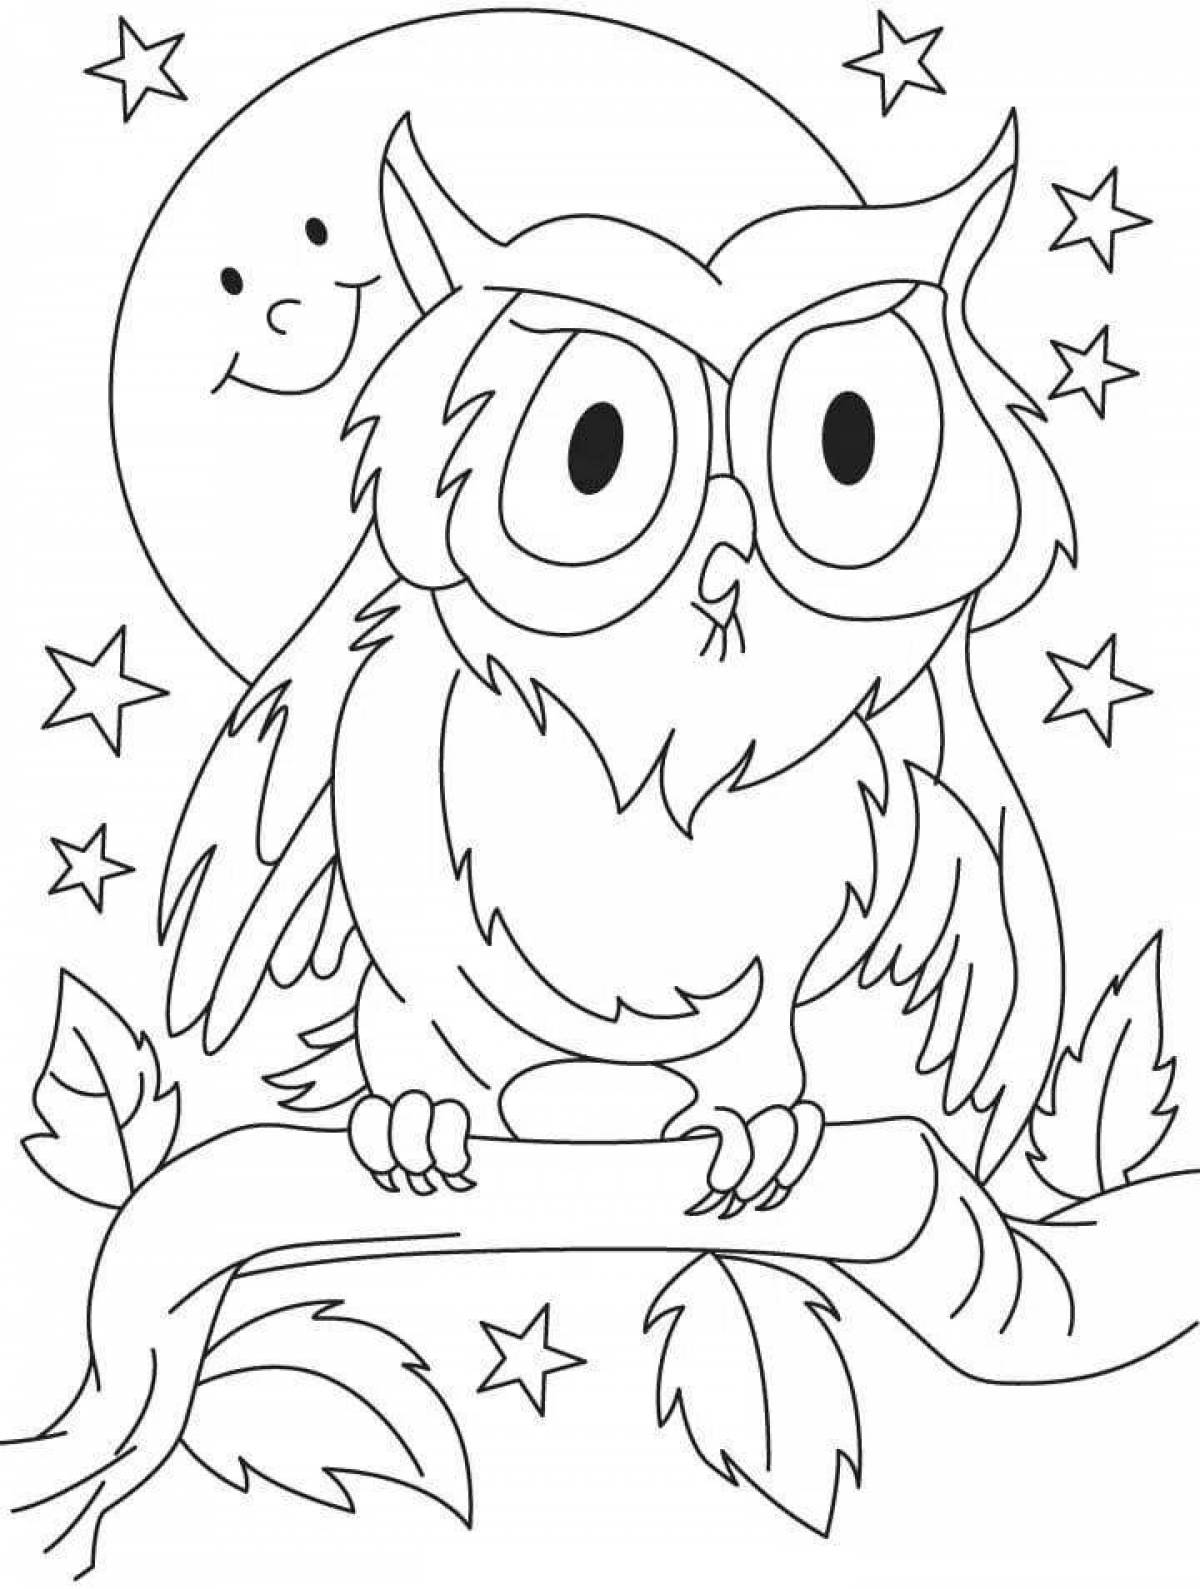 Coloring page playful owl on the tree